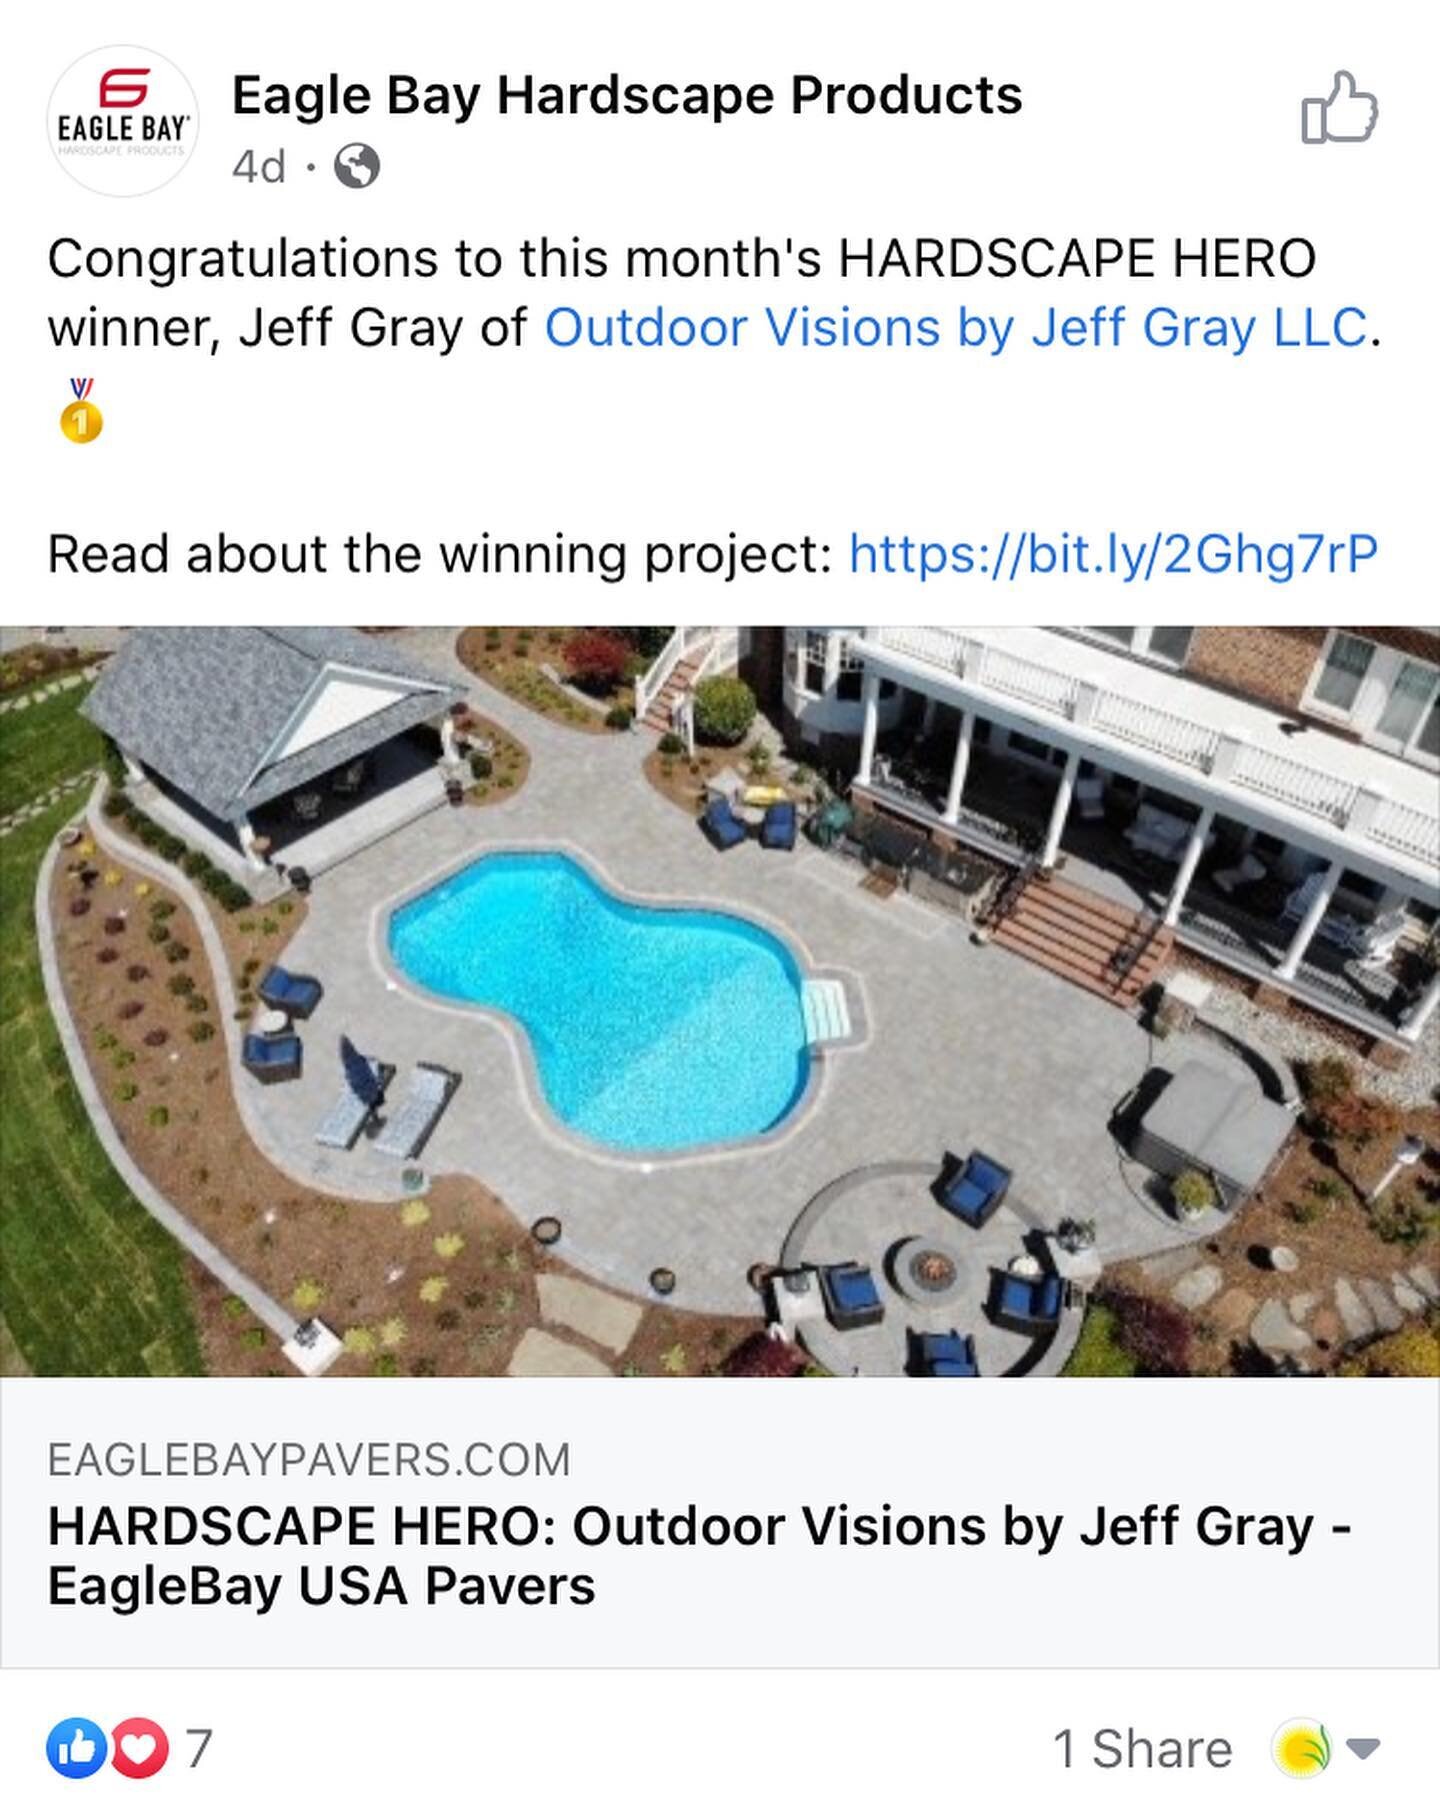 We&rsquo;re excited to announce that we were named Eagle Bay&rsquo;s Hardscape Hero for the month of September. We had a blast with this project and always appreciate when the teams&rsquo;s hard work is noticed.